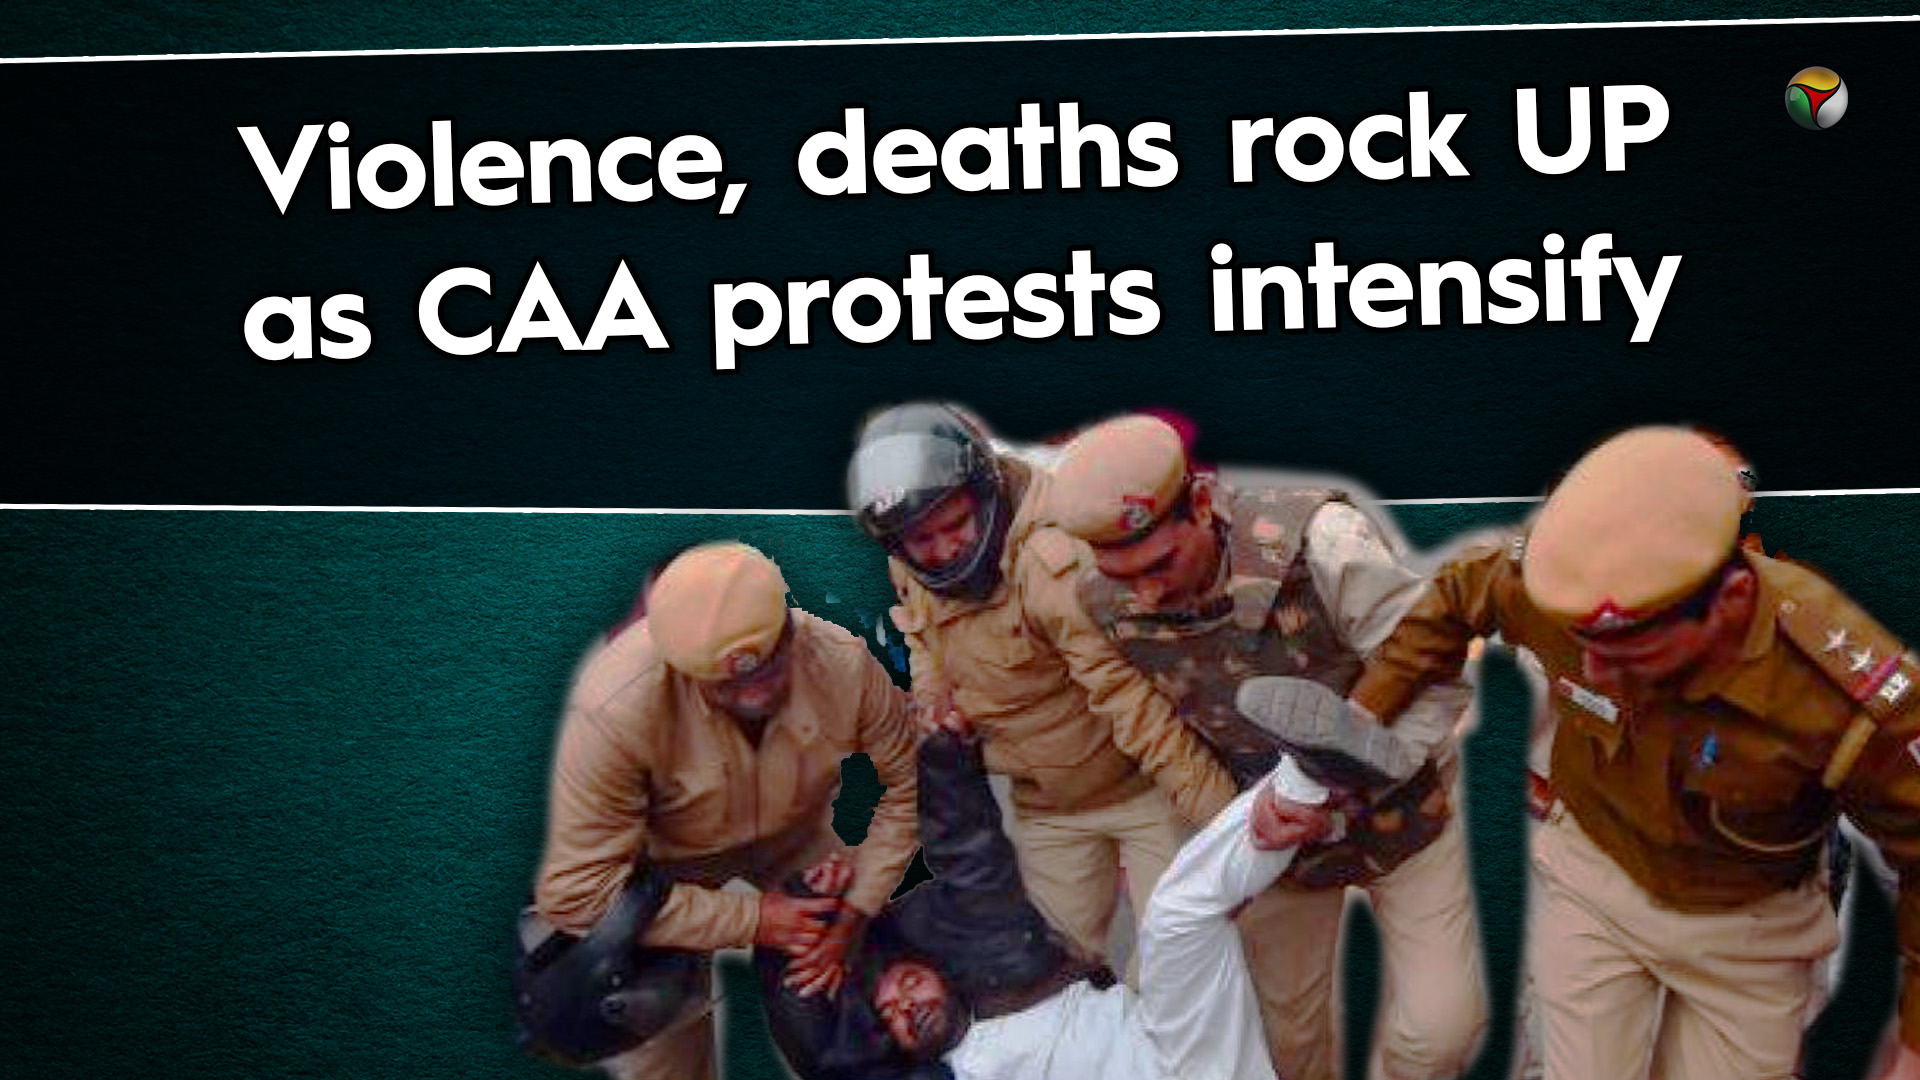 Violence, deaths rock UP as CAA protests intensify